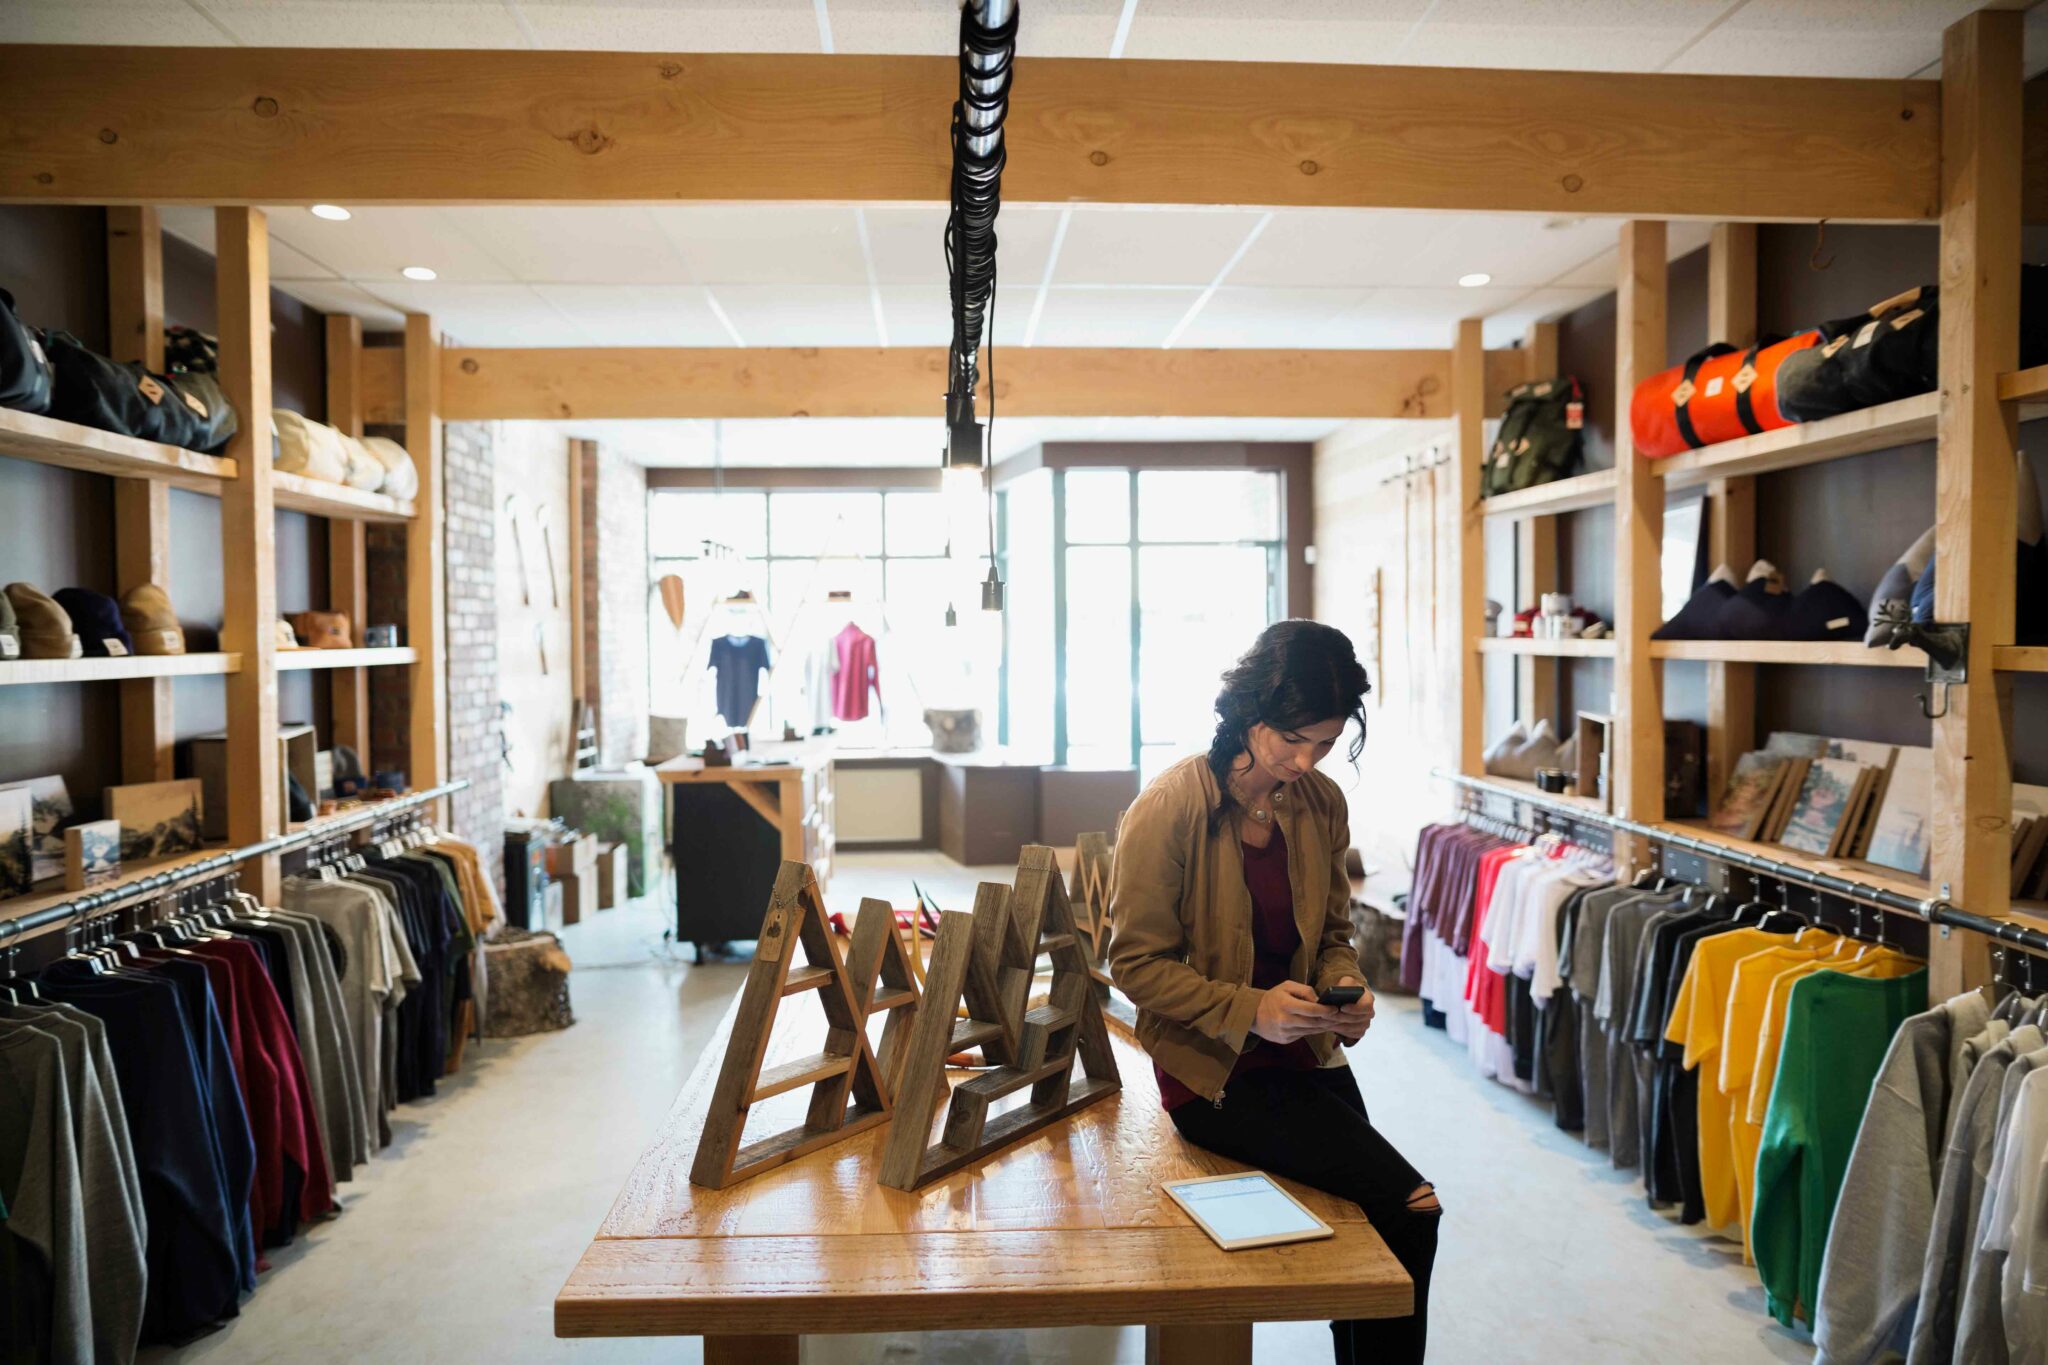 SAP.iO Foundry Paris launches new startup program on “Future of Retail and Consumer Products”